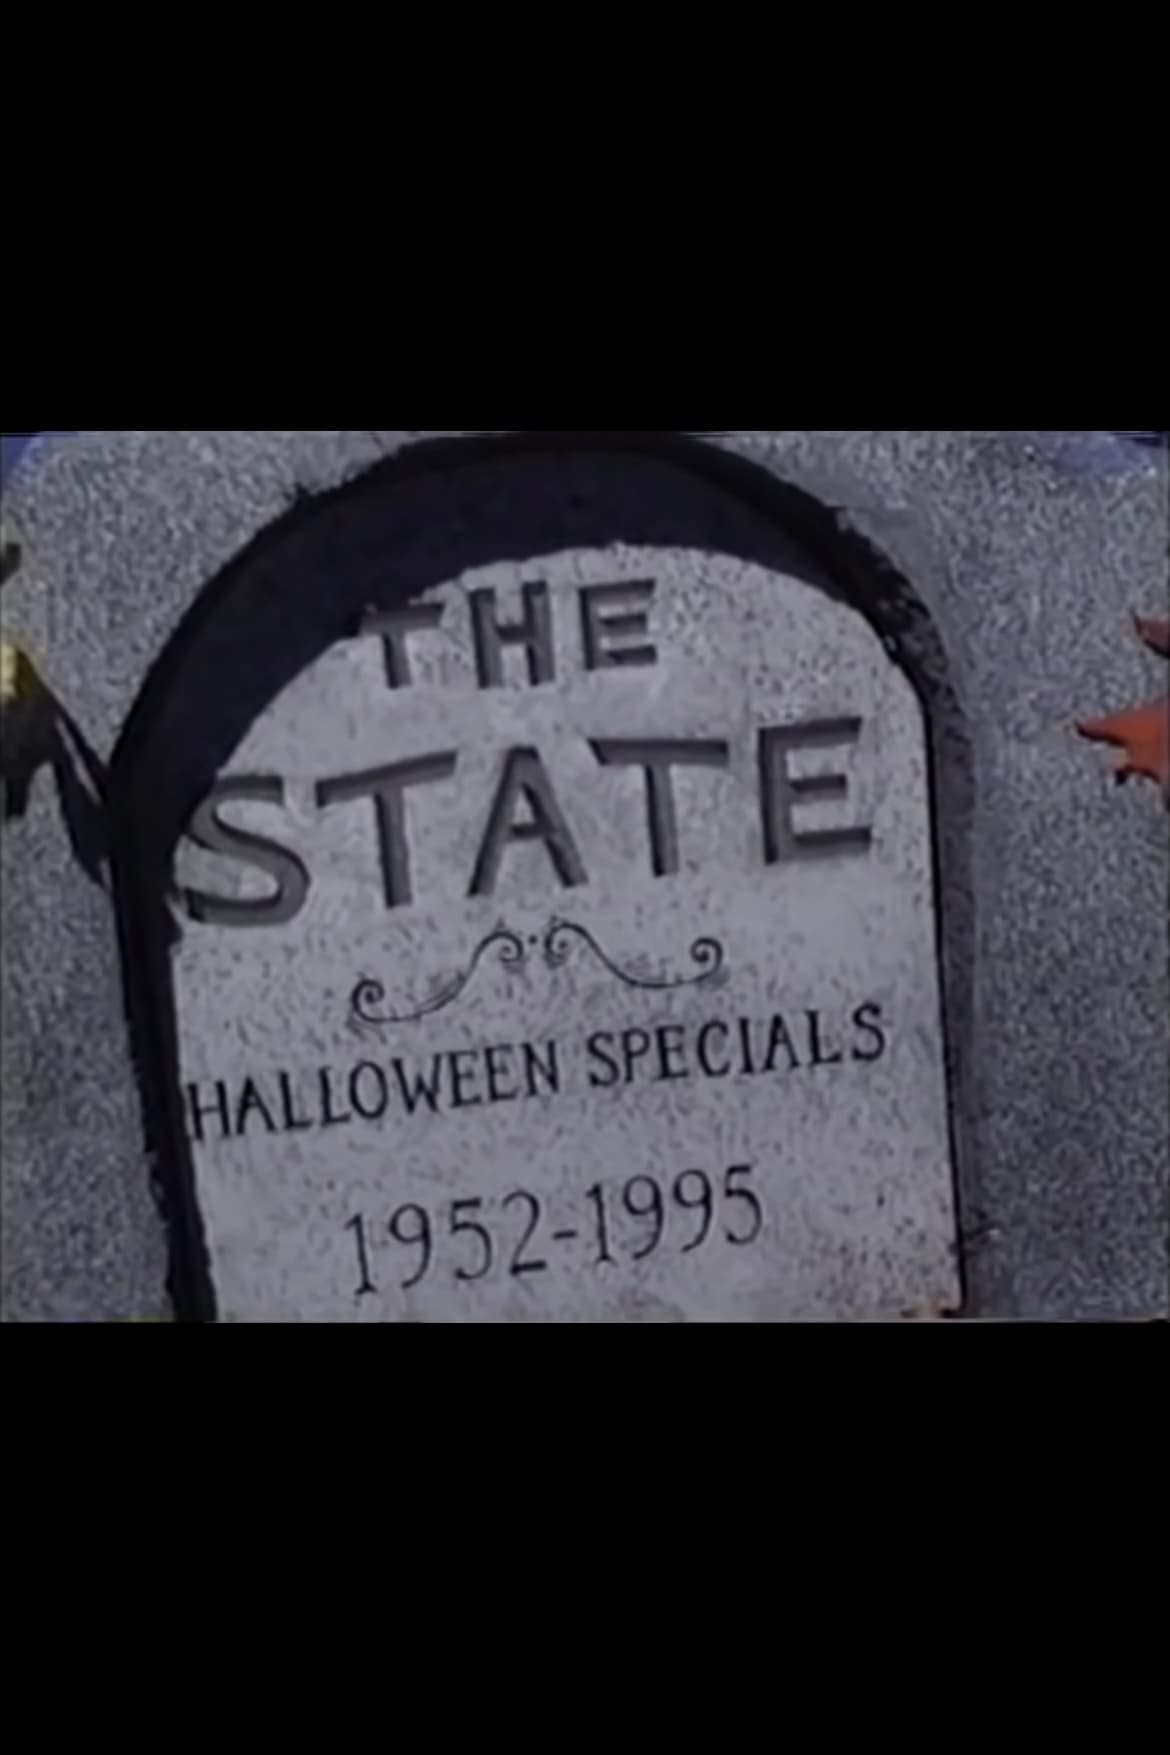 The State's 43rd Annual All-Star Halloween Special (1995)